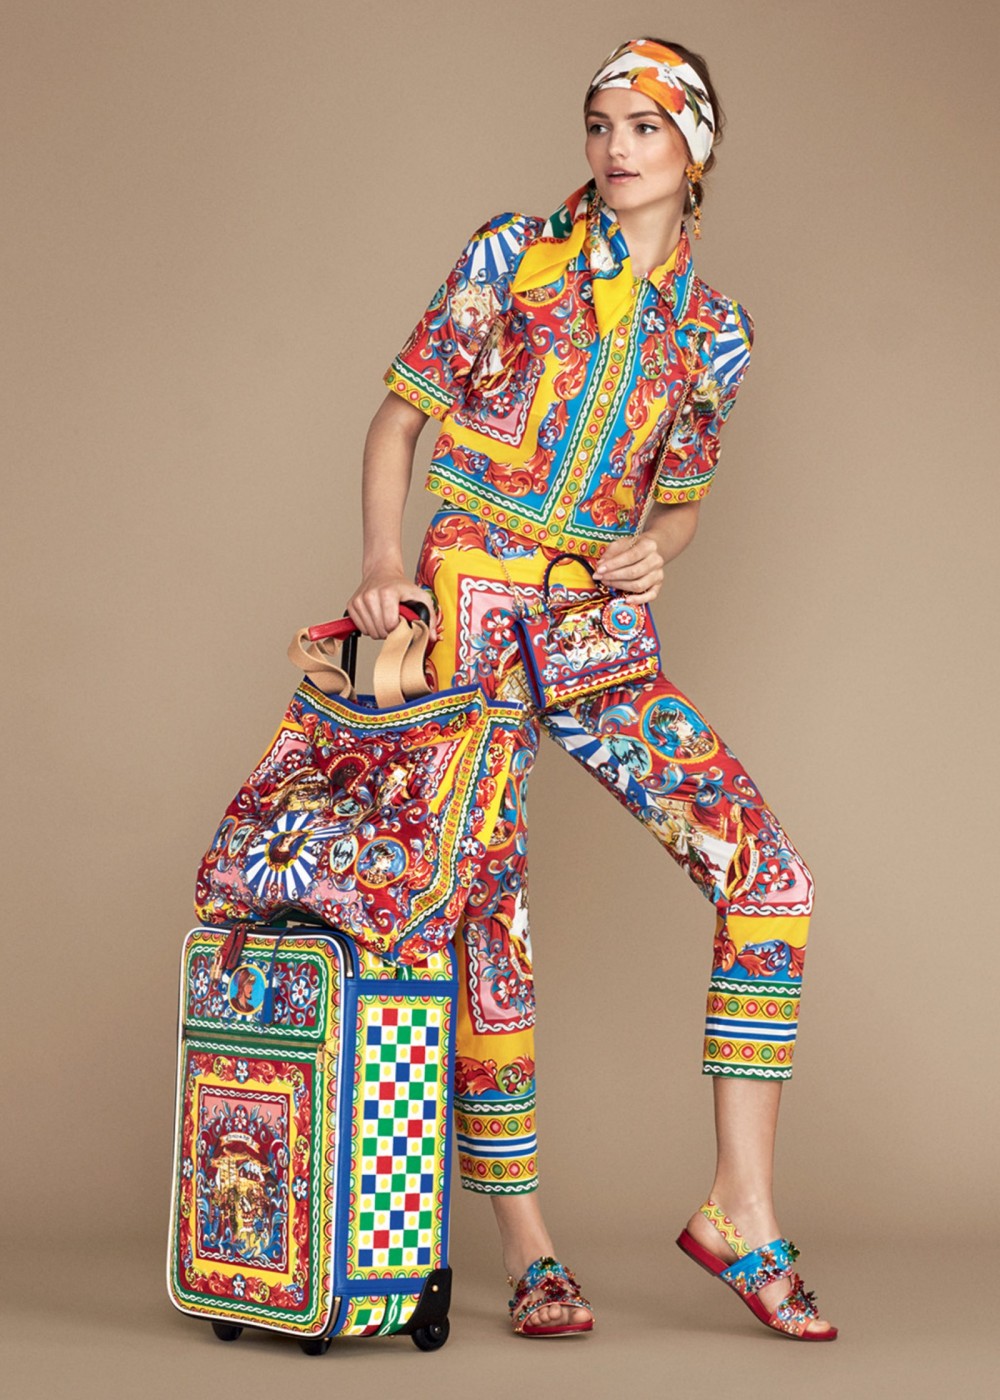 dolce-and-gabbana-summer-2016-woman-collection-61-1600x2240 - Copy